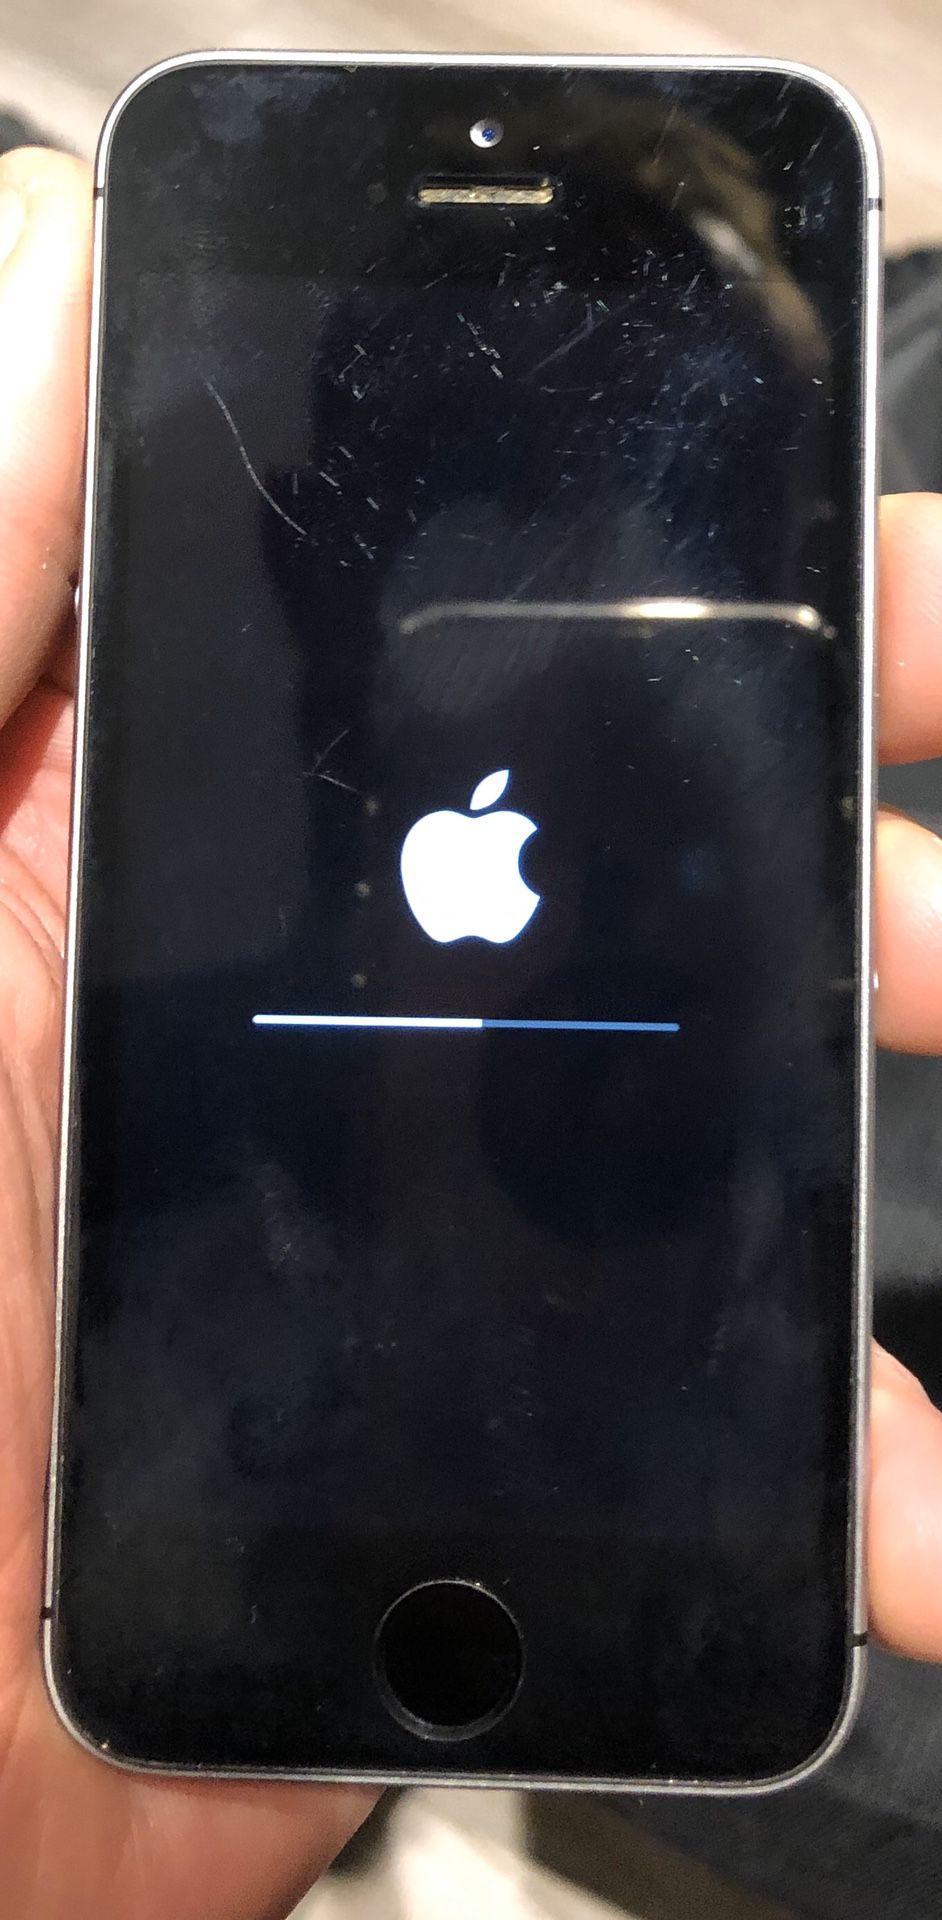 A steal - barley used unlocked iPhone 5se. Used on AT&T, Metro PCS , etc .